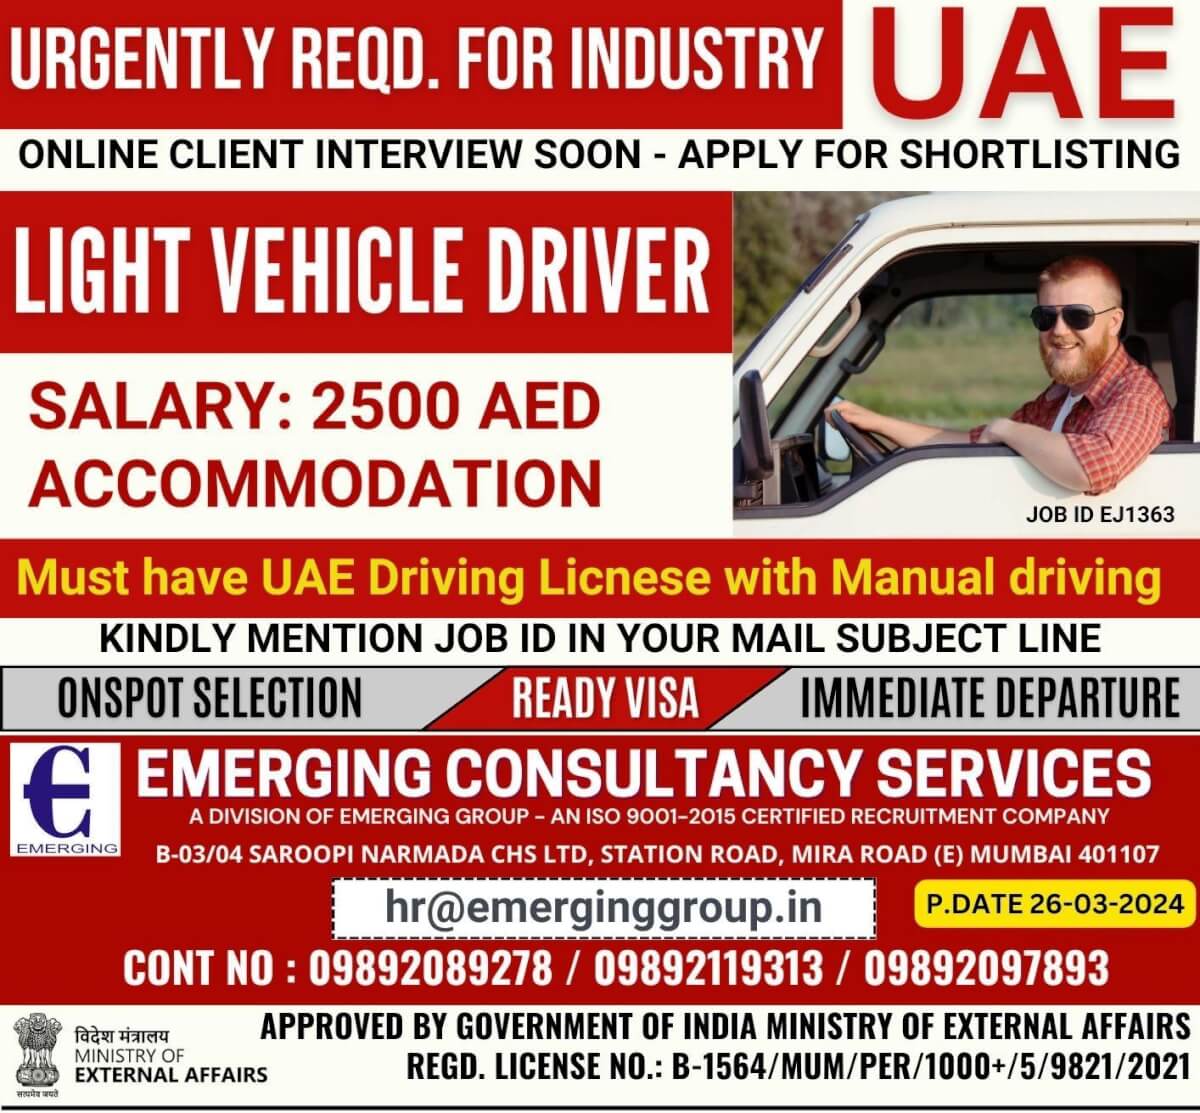 URGENTLY REQD. FOR INDUSTRY IN UAE